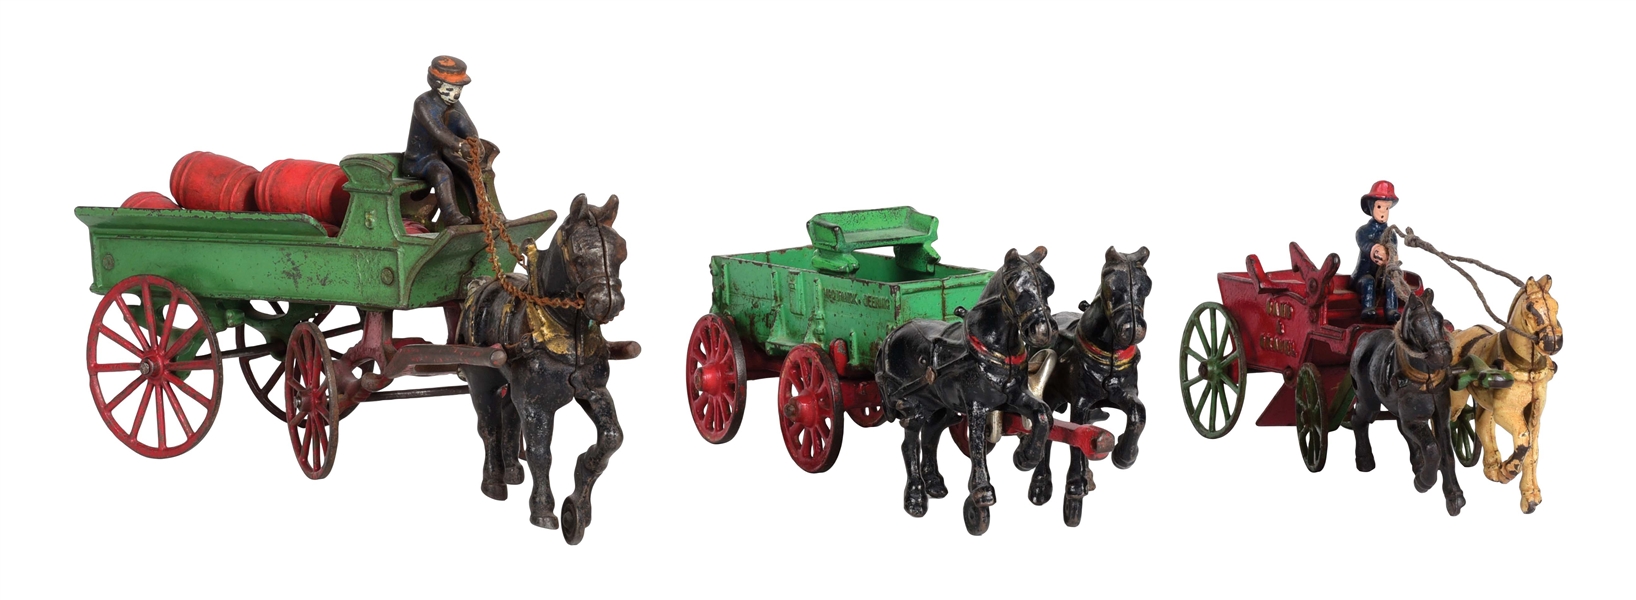 LOT OF 3: AMERICAN-MADE CAST IRON HORSE-DRAWN WAGONS.